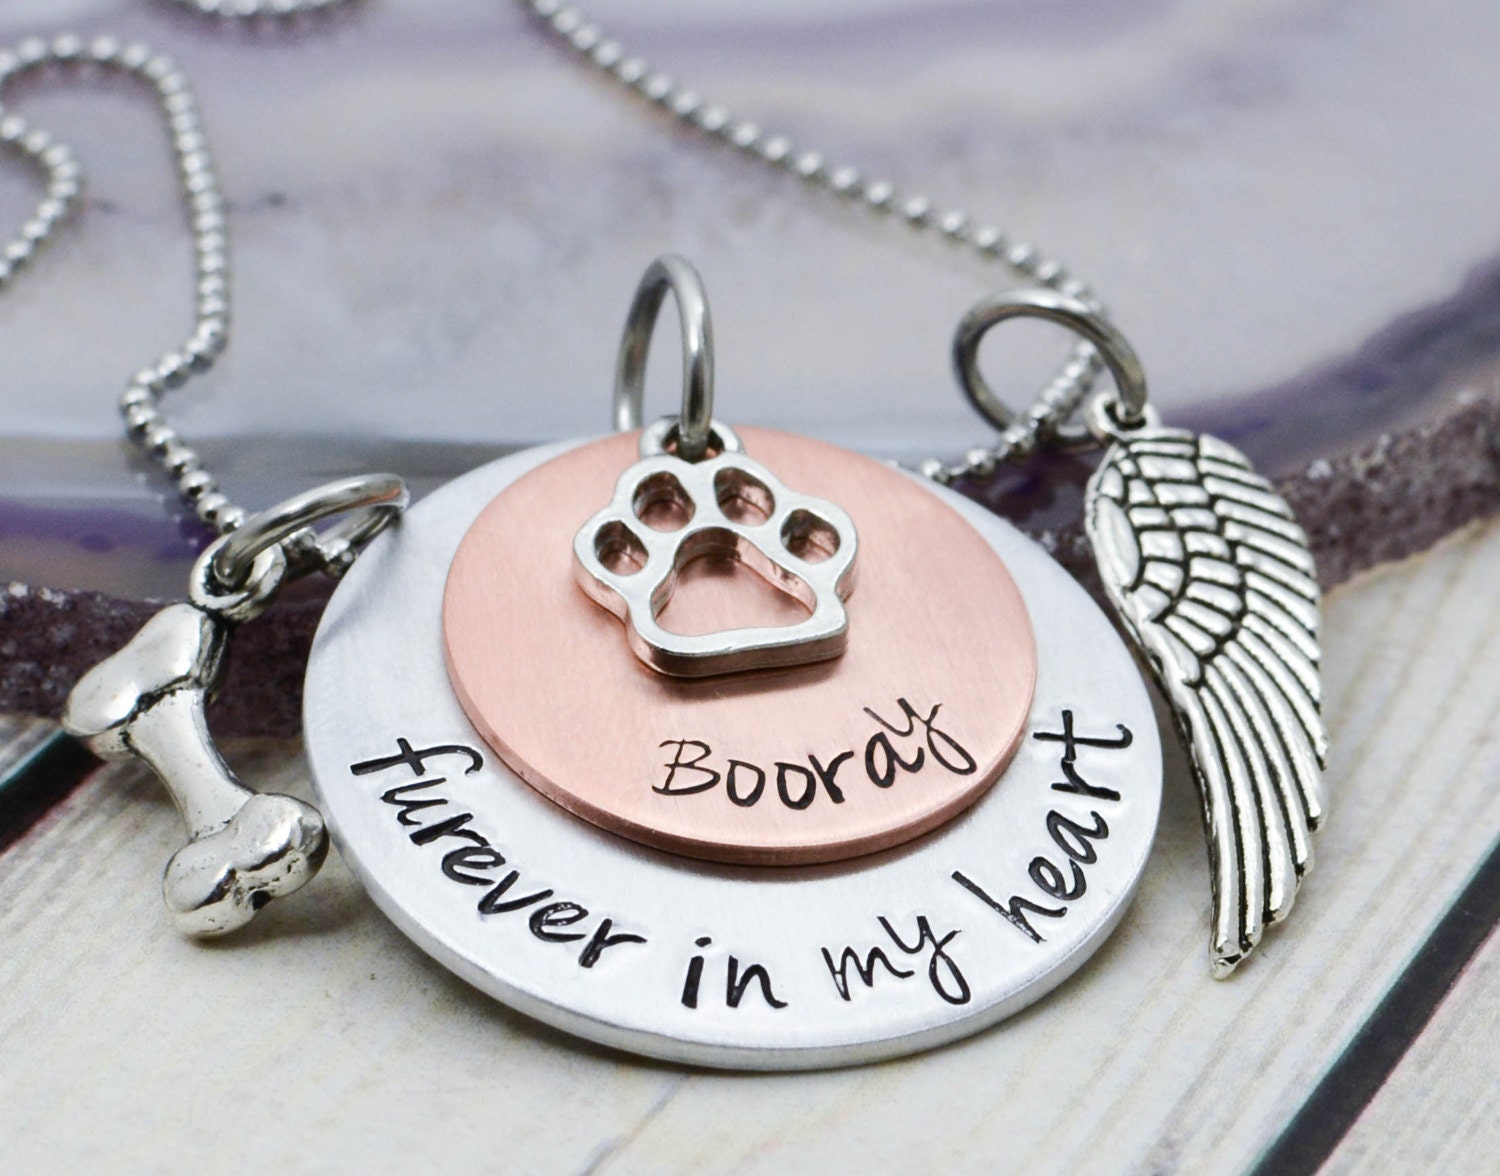 25 HQ Images Custom Pet Necklace Uk : Personalized Custom Dog Cat Image 925 Sterling Silver Pet ...